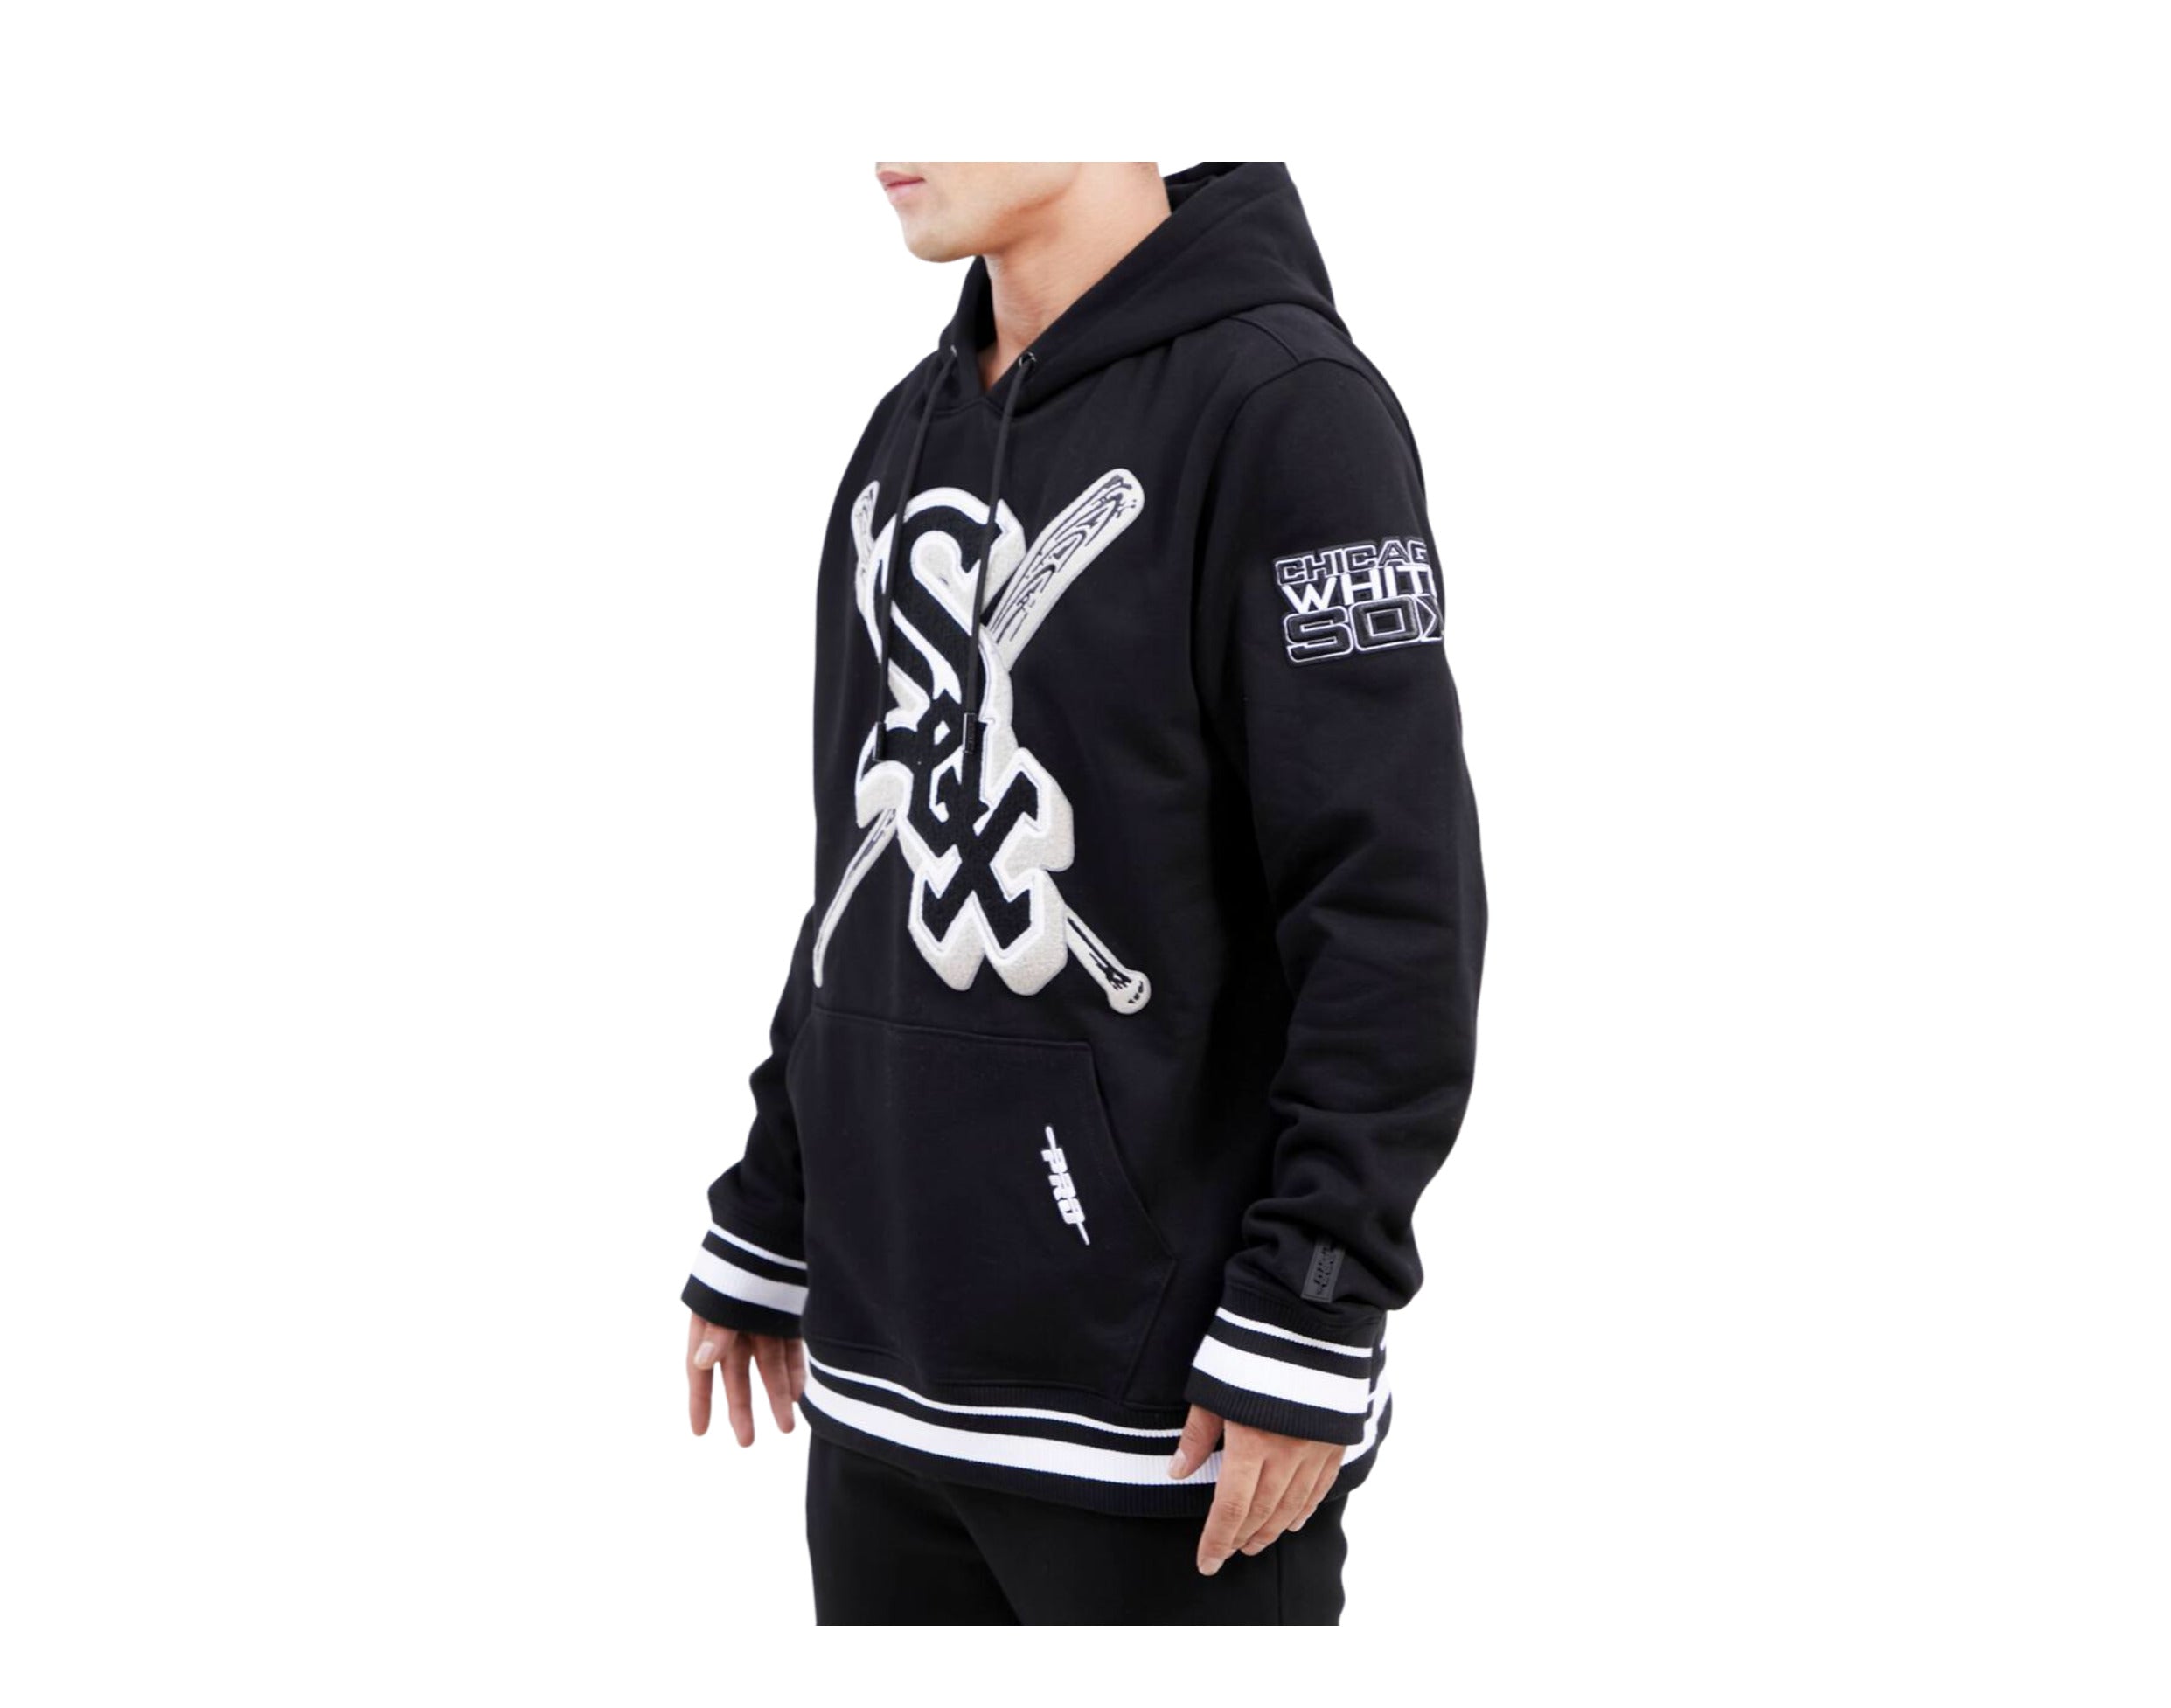 MLB Men's Chicago White Sox Black Colorblock Pullover Hoodie